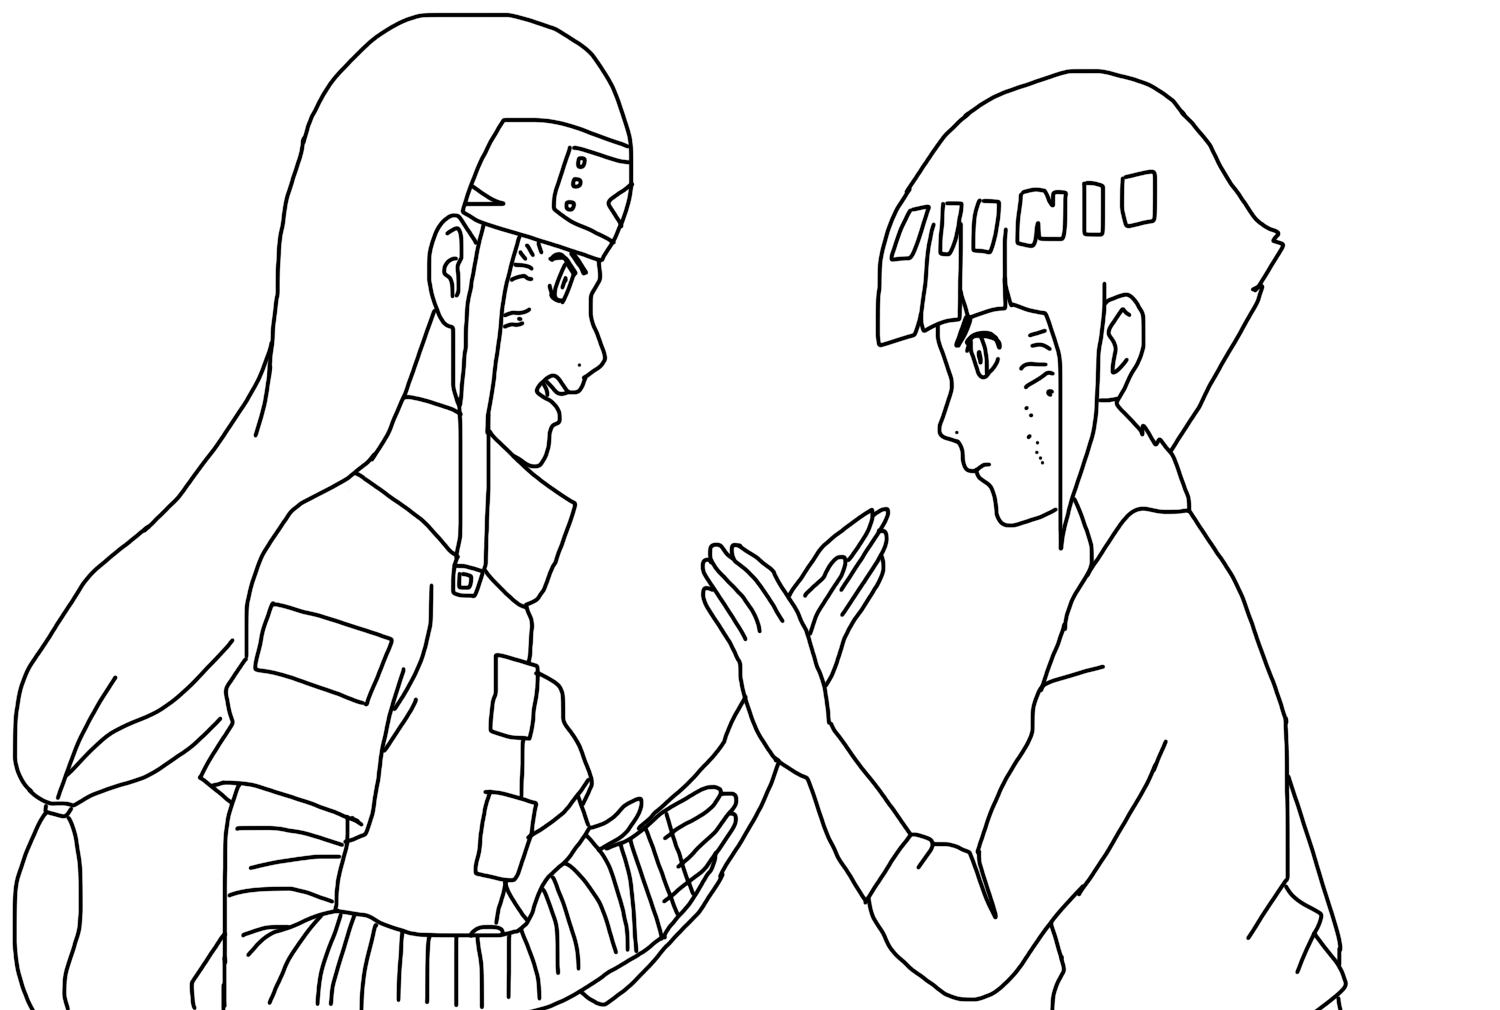 Hyuga Hinata Coloring Pages - Coloring Pages For Kids And Adults in 2023